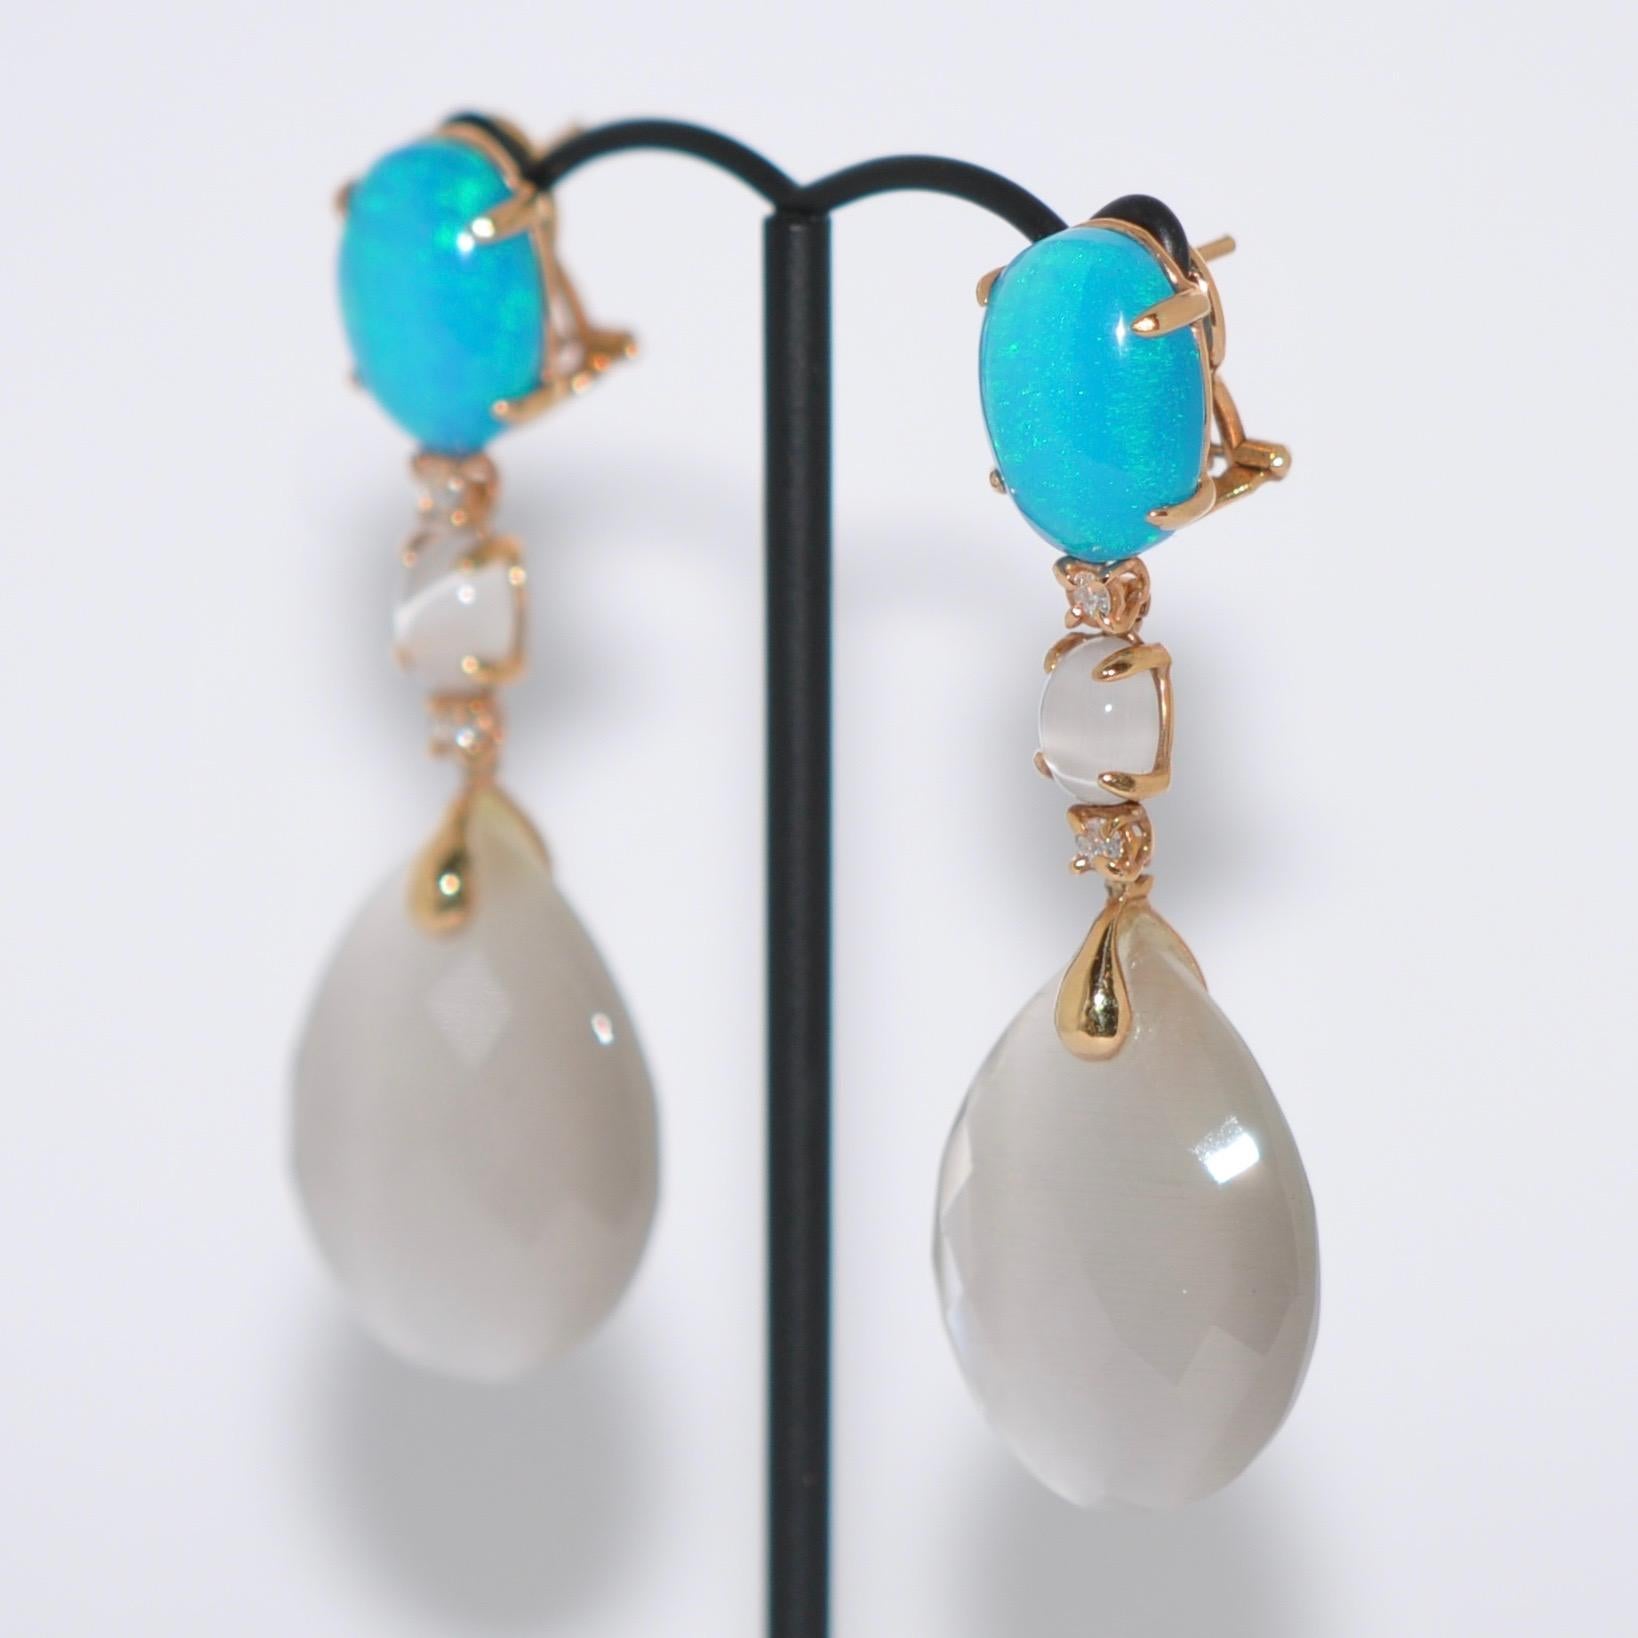 Discover this Grey Opal, Quartz and White Diamond on Rose Gold 18K Chandelier Earrings.
Grey Opal
Quartz
White Diamond
Rose Gold 18K
